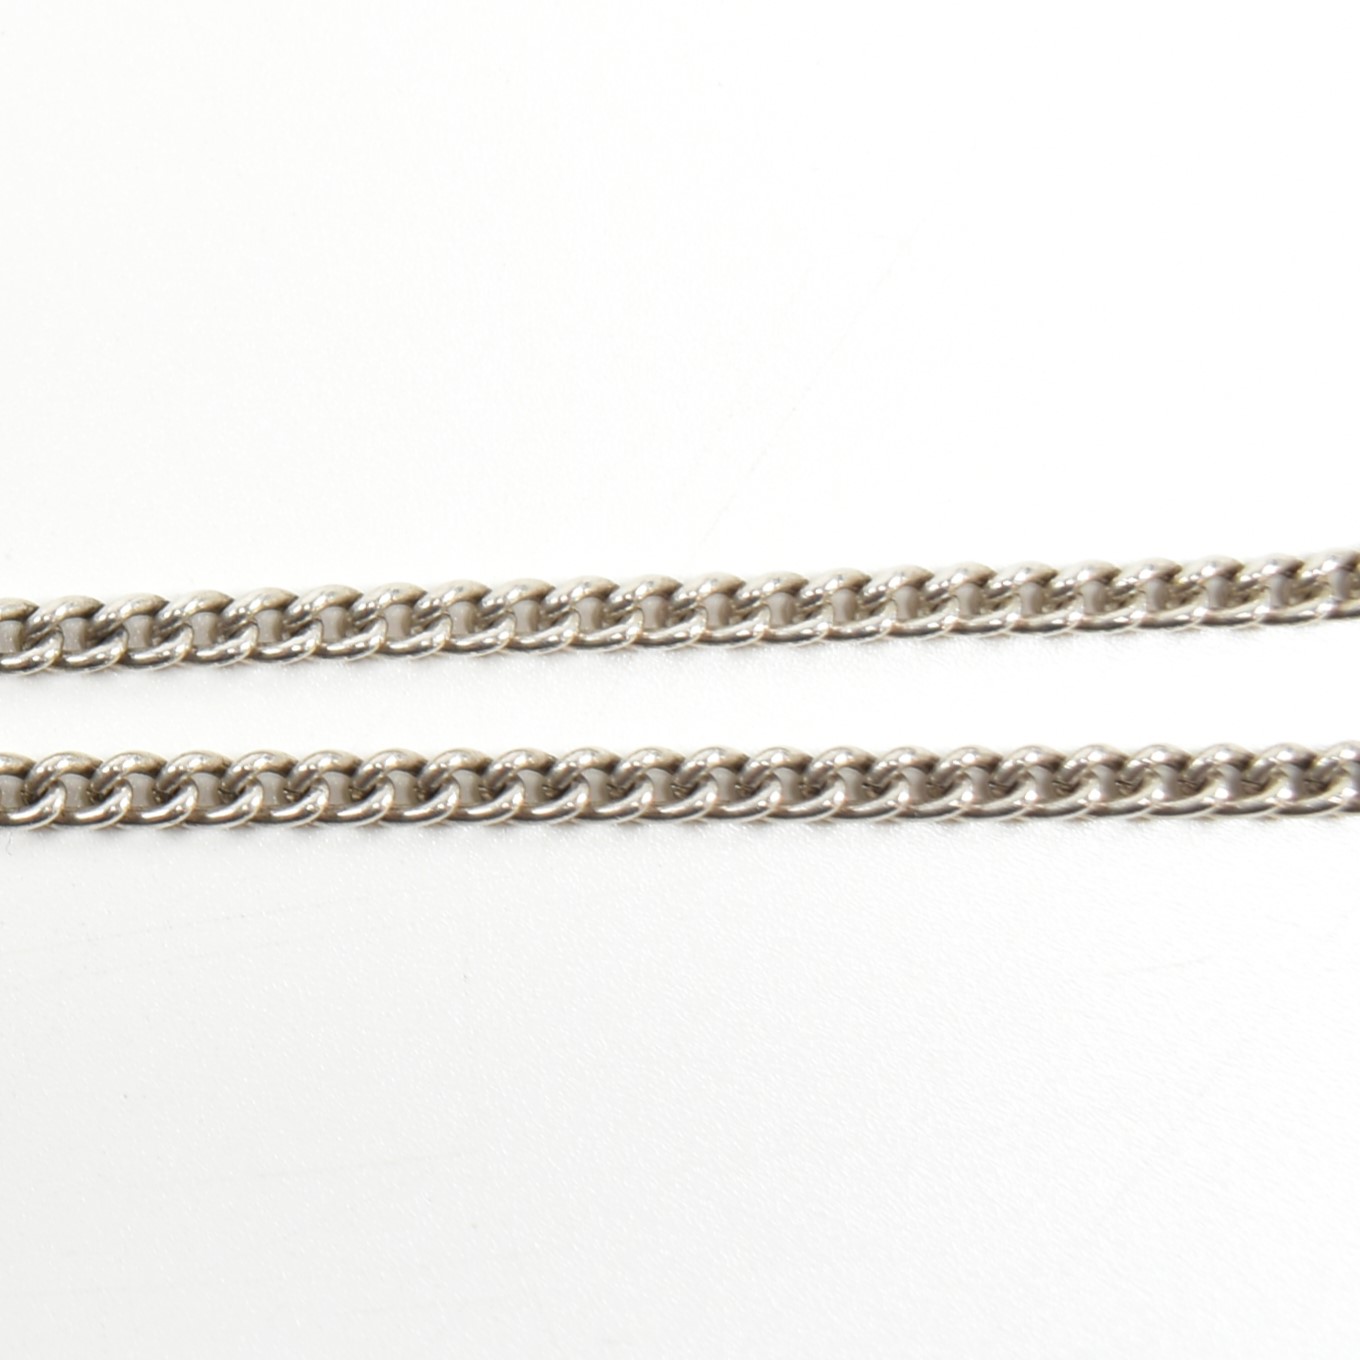 HALLMARKED SILVER ALBERT CHAIN SHIELD FOB ON CURB LINK CHAIN NECKLACE - Image 3 of 6